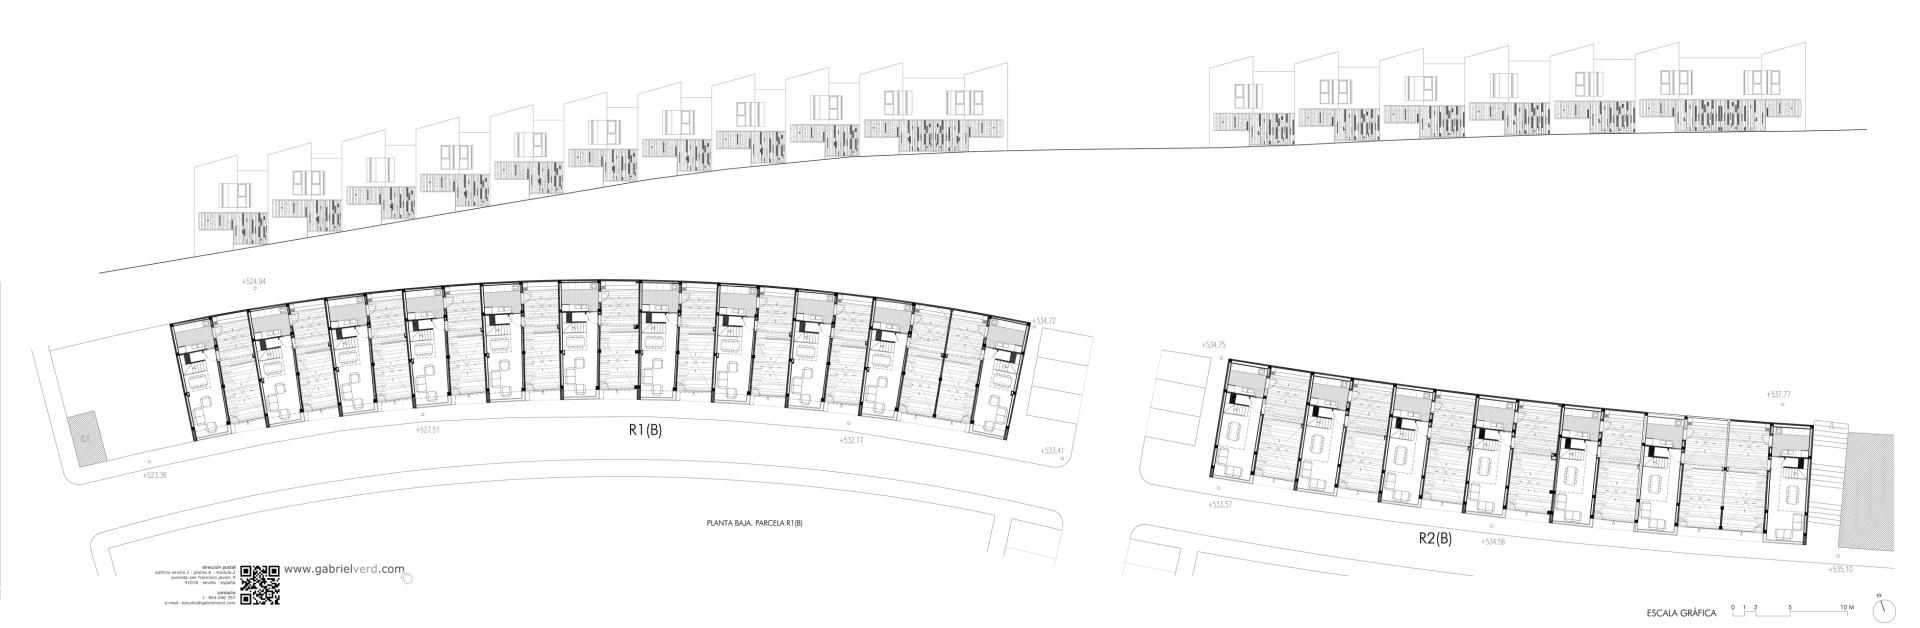 CORDOVA SOCIAL HOUSING SITE LAYOUT AND MASSING